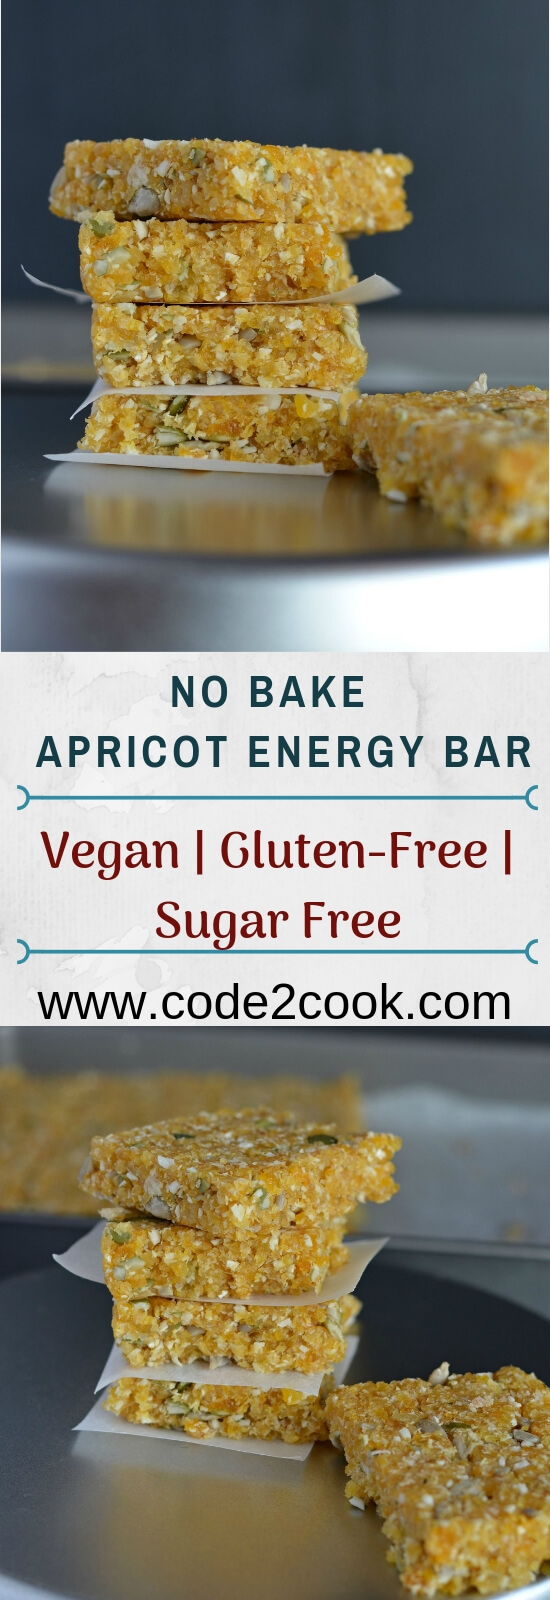 No bake apricot energy bar are prepared with apricots, almonds, oats, sunflower seeds, pumpkin seeds, and coconut. These are sugar-free, vegan, gluten-free, and dairy free. Being sugar-free these no bake apricot energy bars makes a perfect pre or post workout meal.